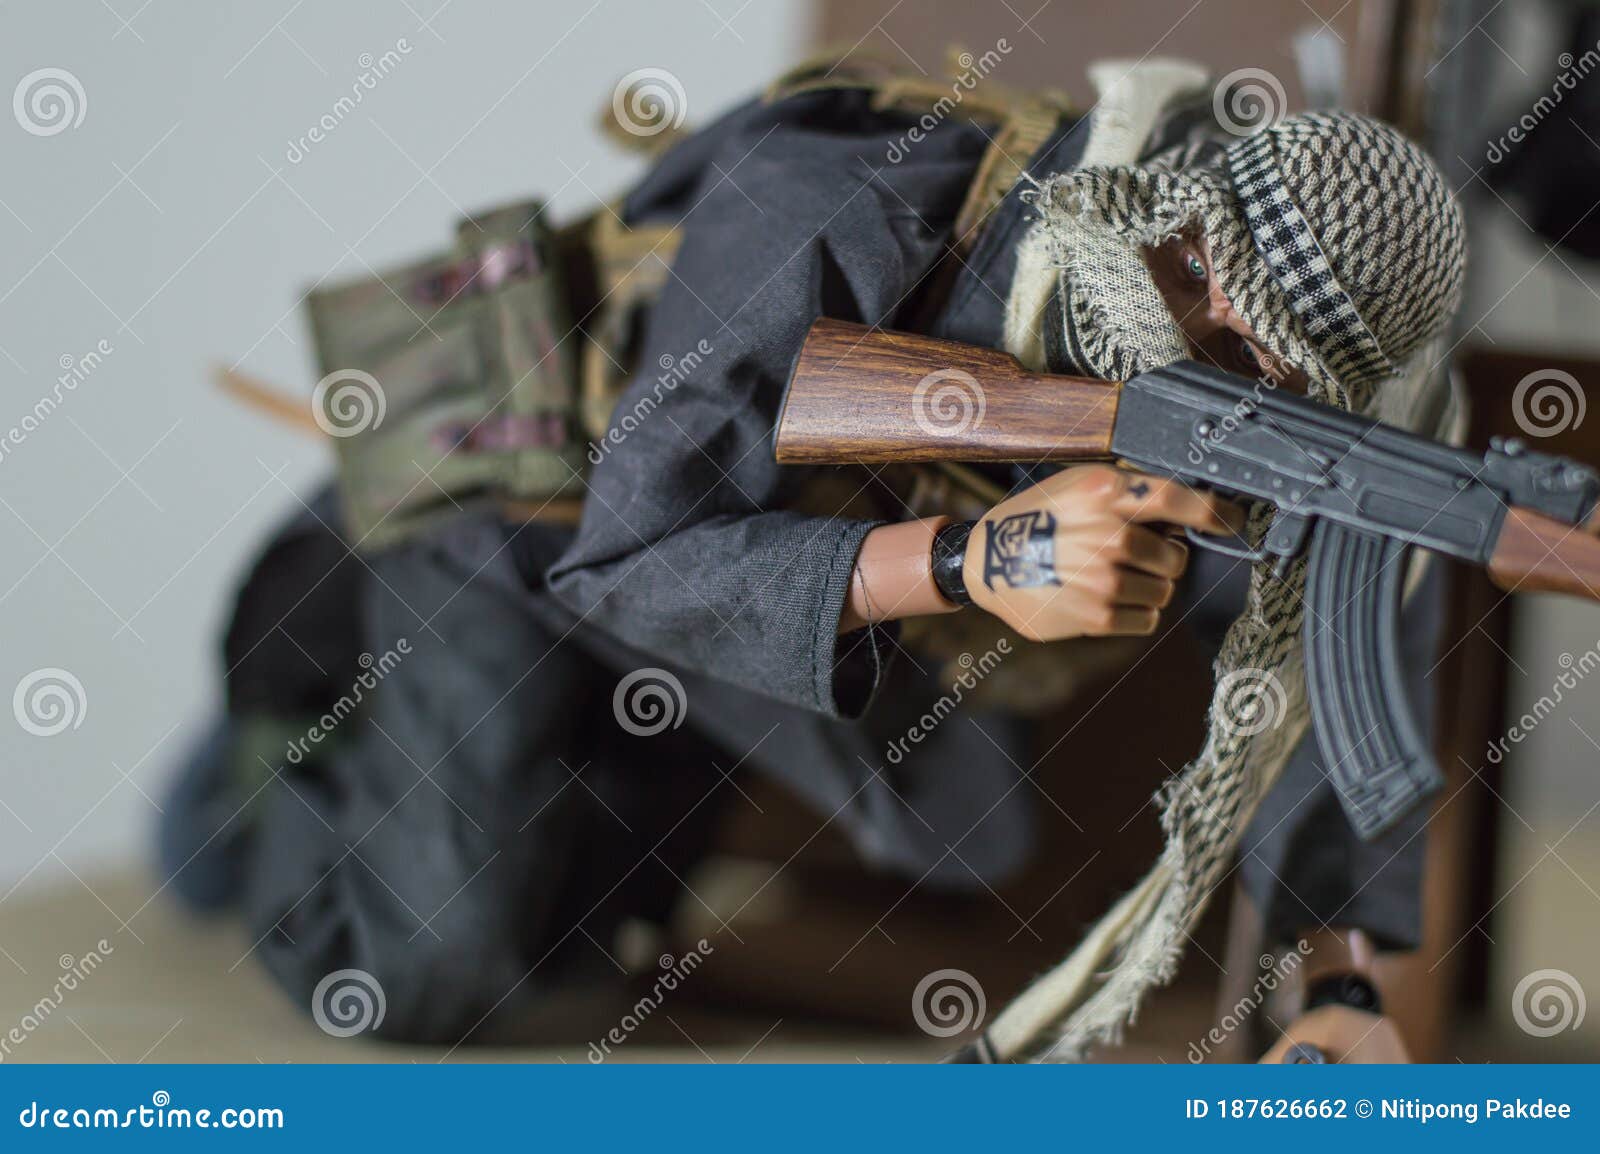 taliban and weapon miniature realistic toys man soldier figure